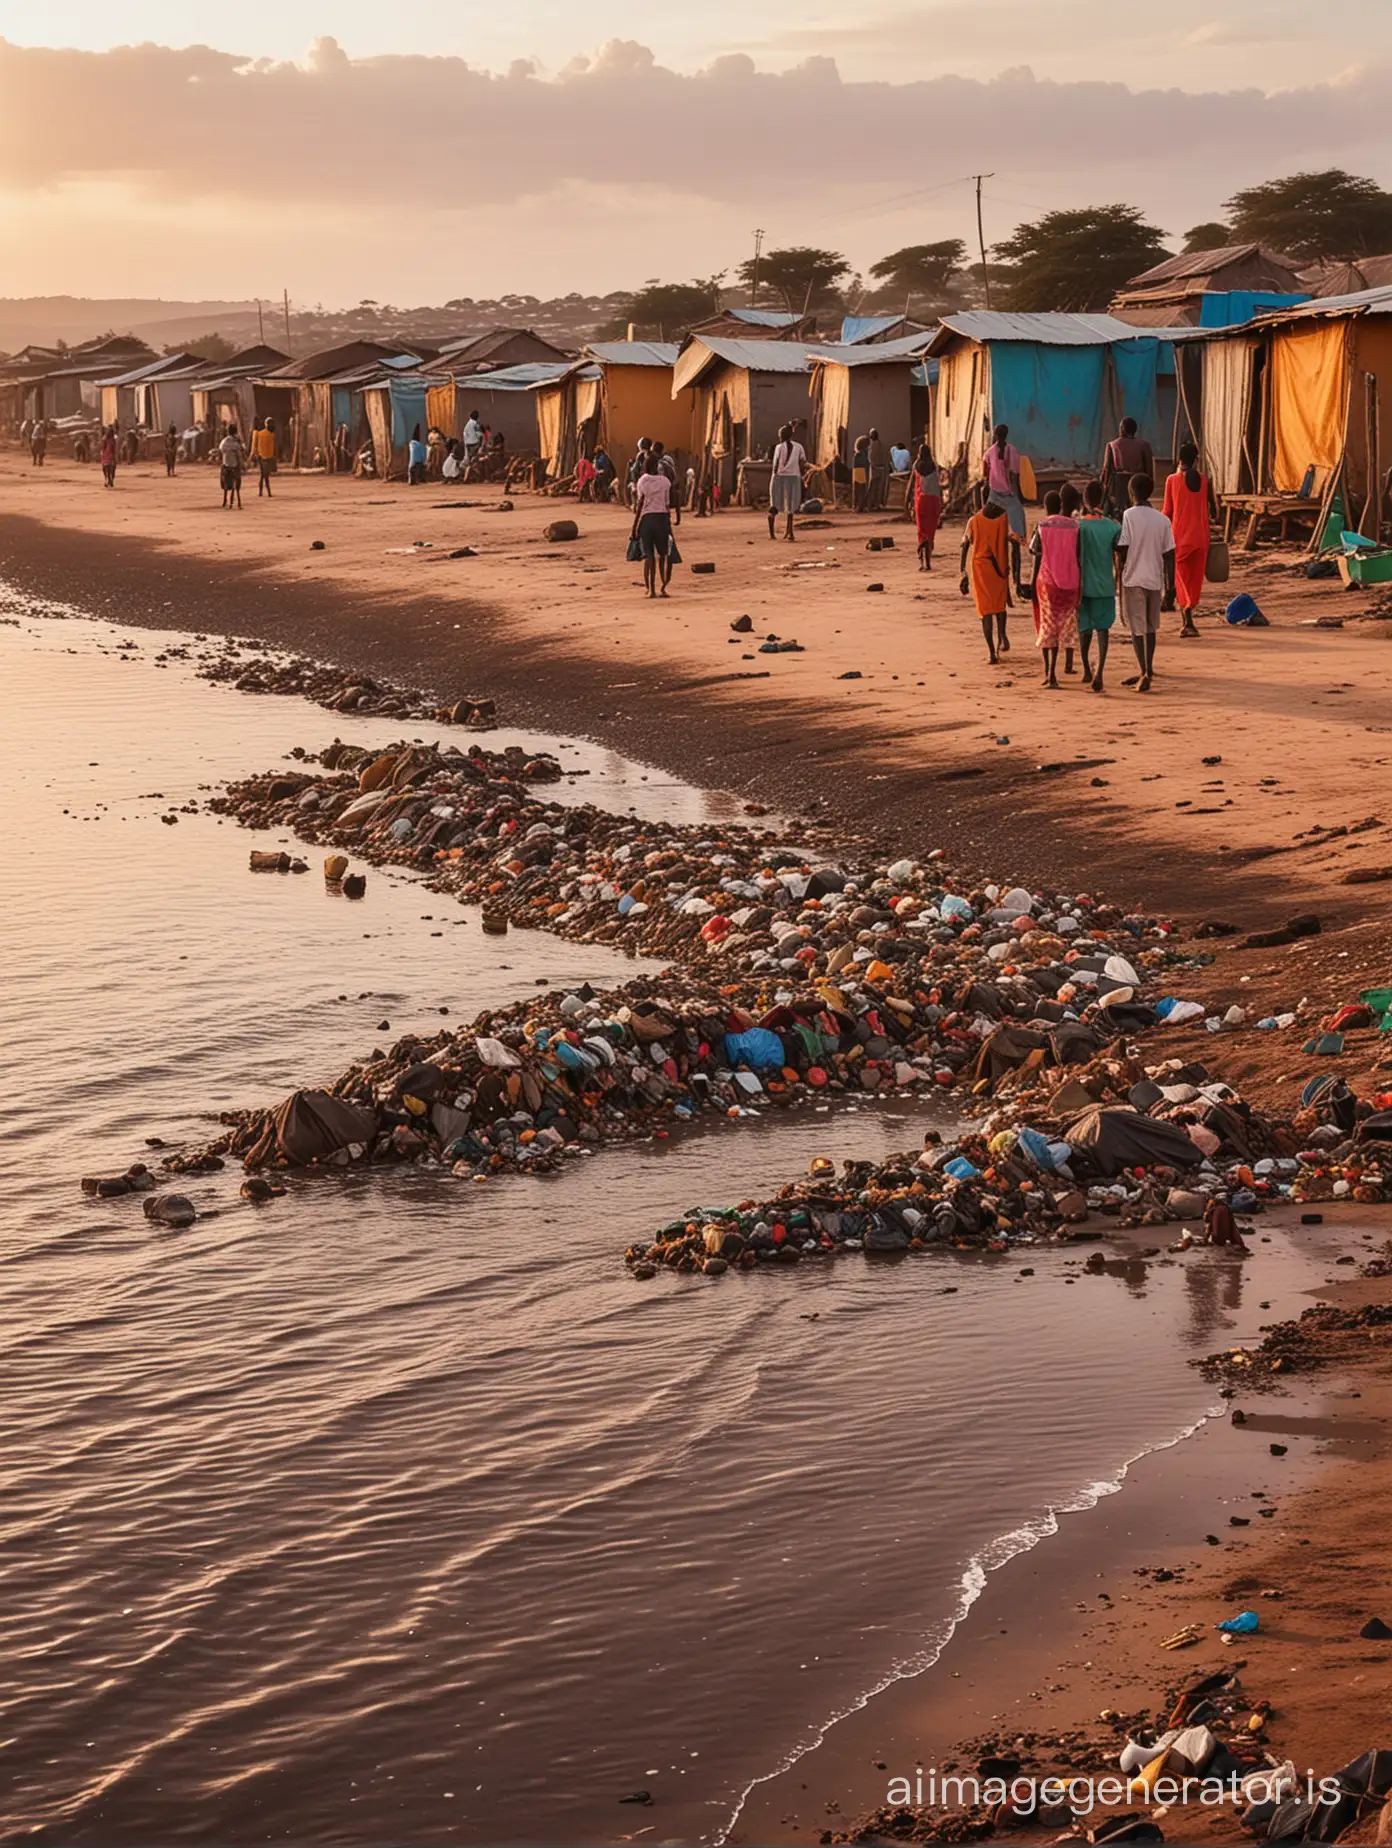 village of dark skin African people, wearing typical colorful clothes, some humble and simple typical houses, garbage everywhere warm light of sunset reflecting in the contaminated sea